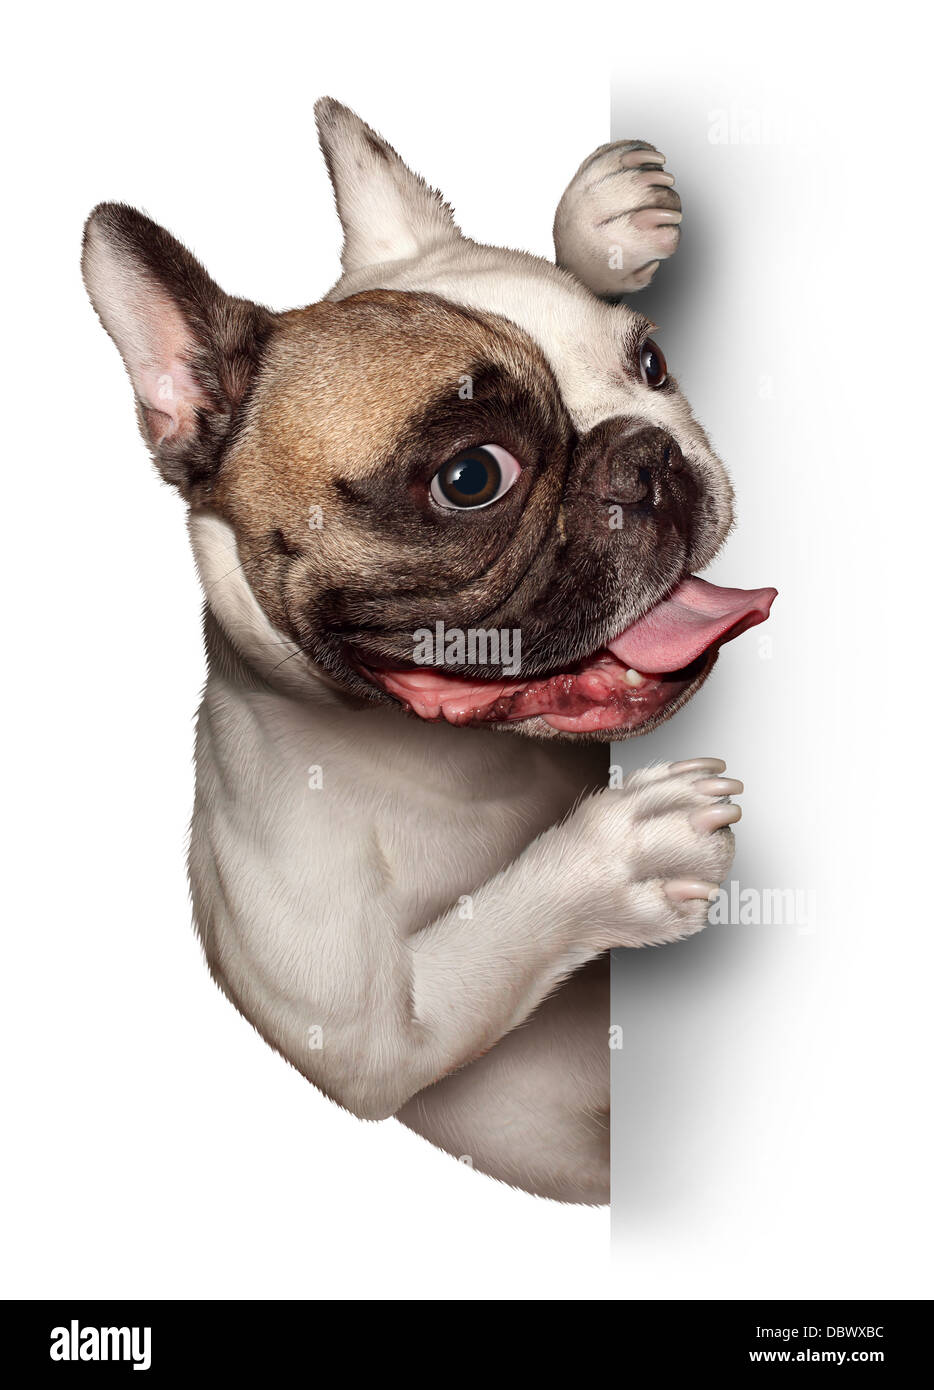 Bull Dog with a blank card vertical sign as a French Bulldog with a smiling happy expression supporting and communicating a message pertaining to pet products and animal care or veterinary services. Stock Photo